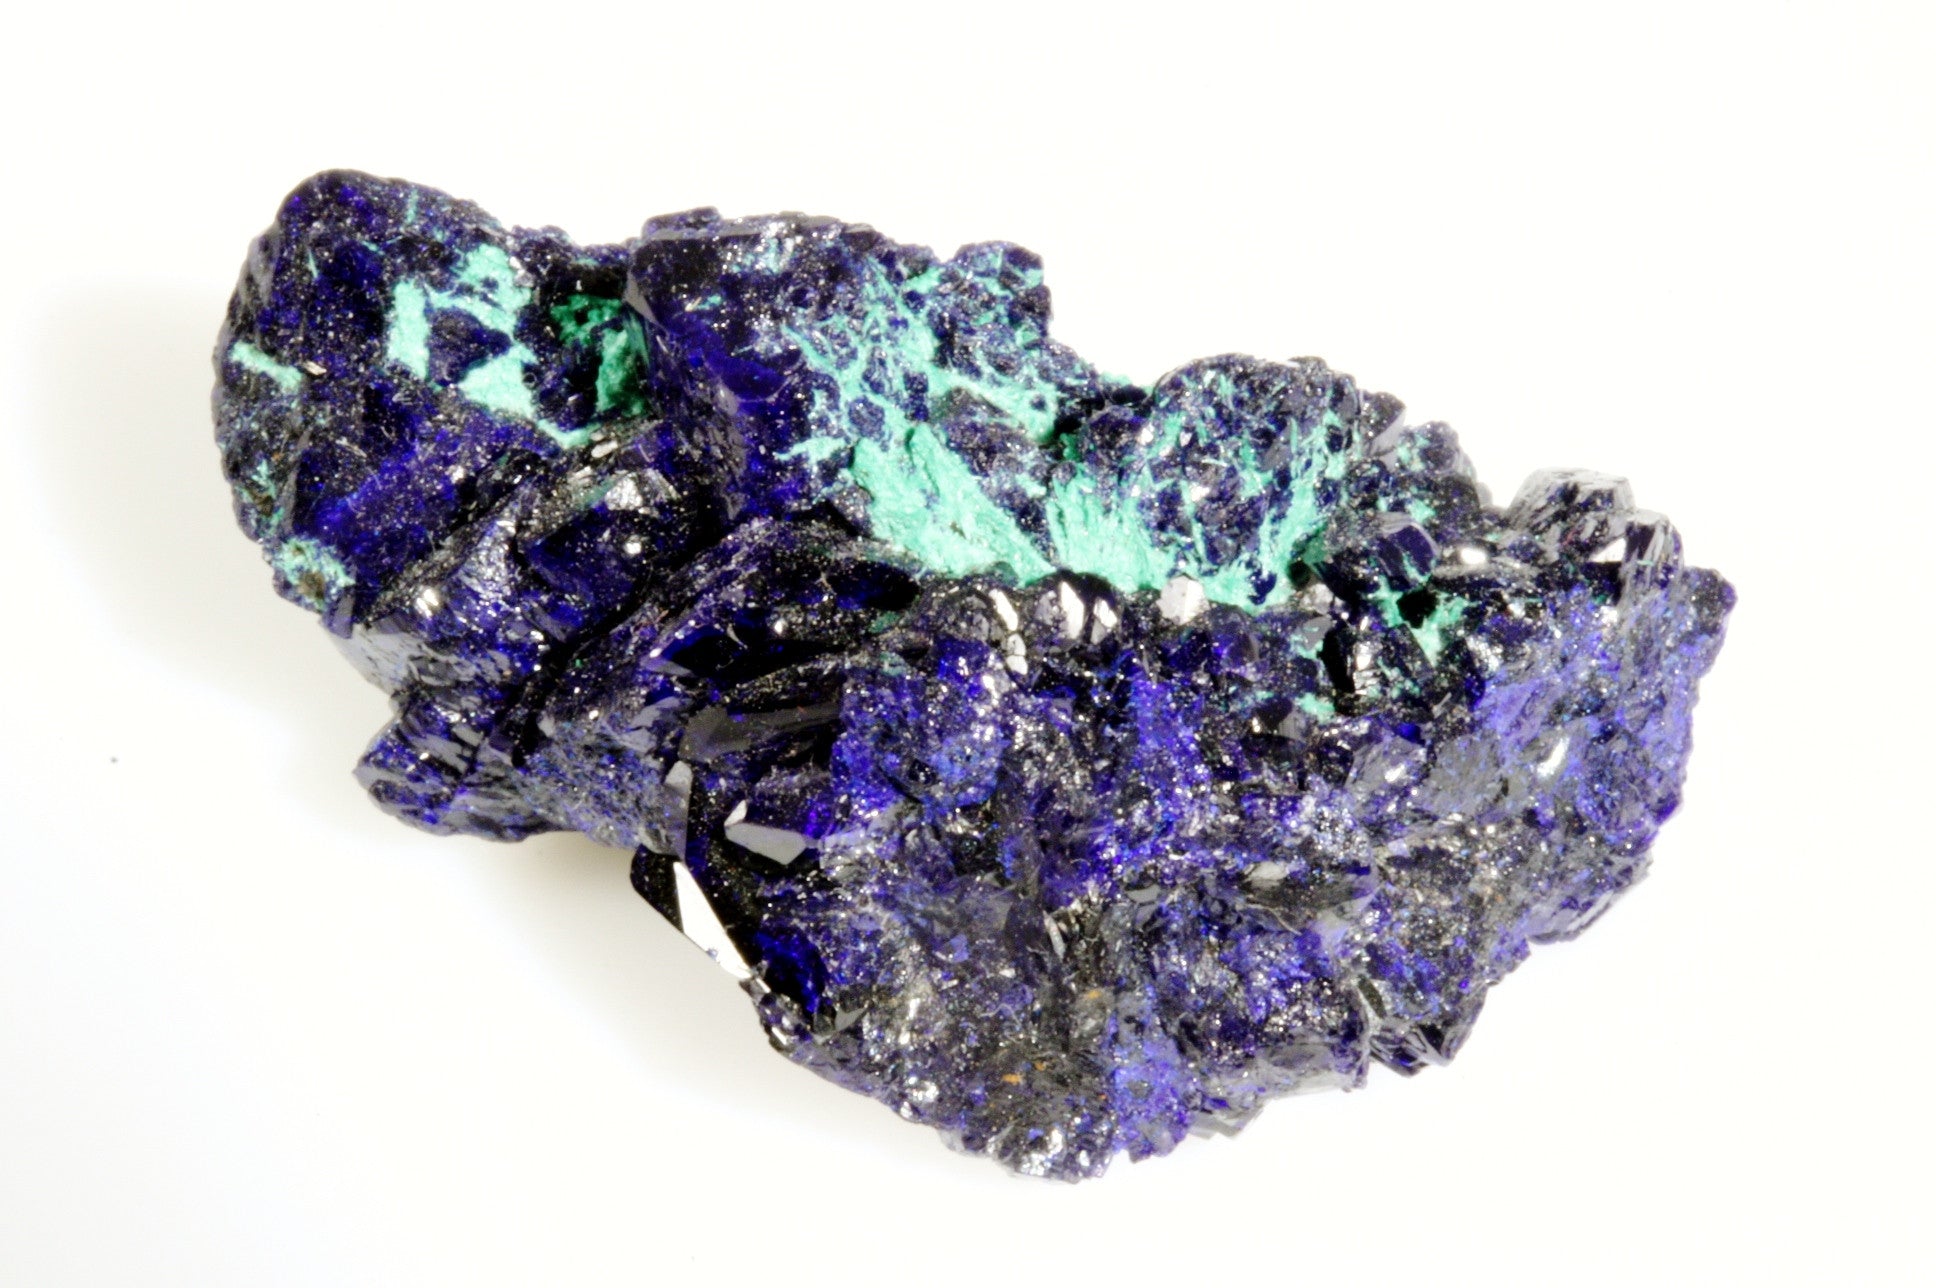 Azurite Crystal Cluster with Fibrous Malachite 2.00" x 1.12" x 0.75"